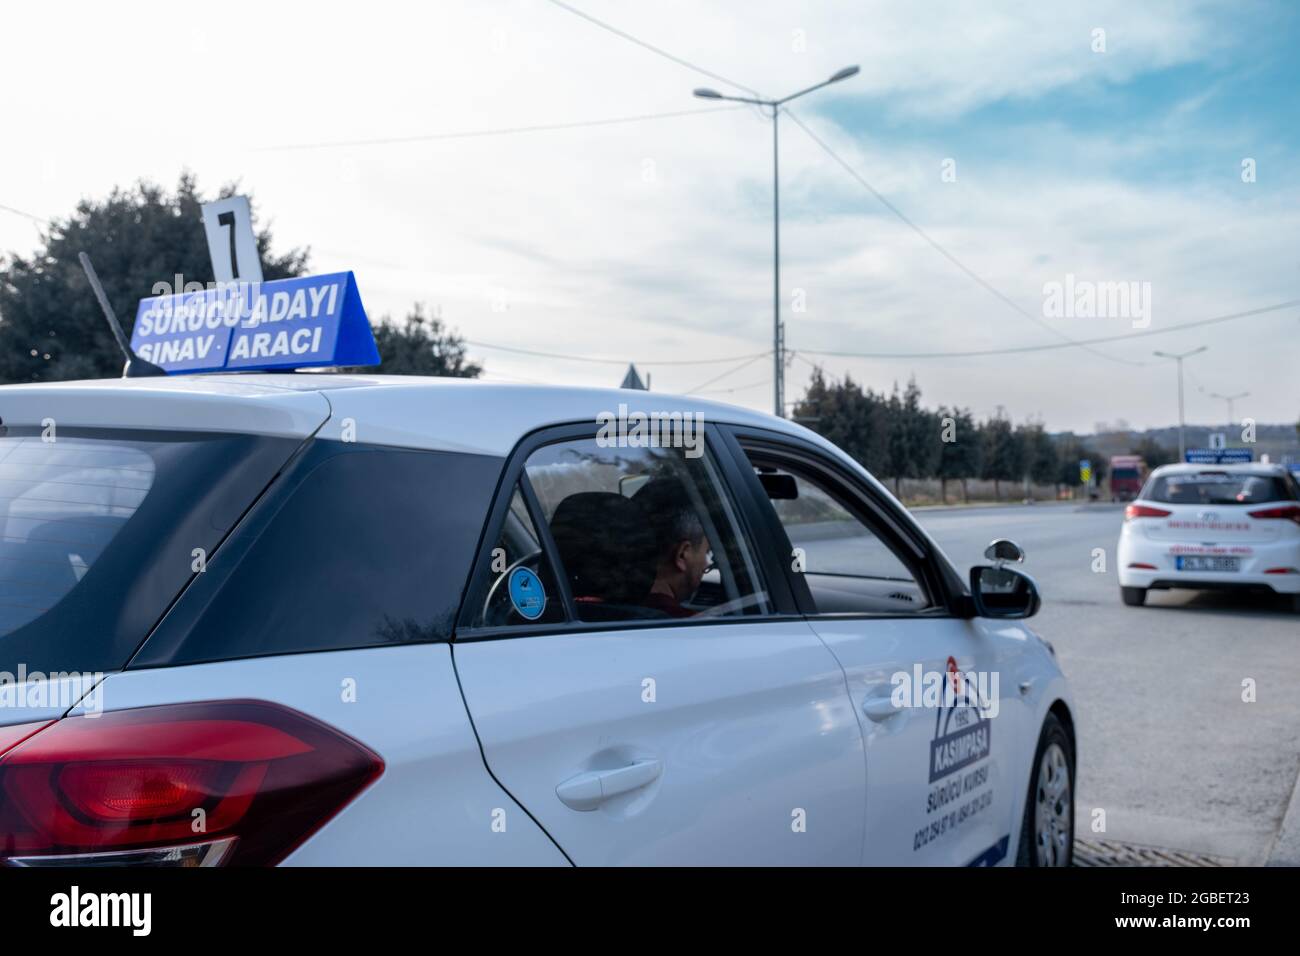 Kemerburgaz, Istanbul, Turkey - 02.18.2021: close up of a driving test car which is about to move and out of focus foreground. Translation of signboar Stock Photo